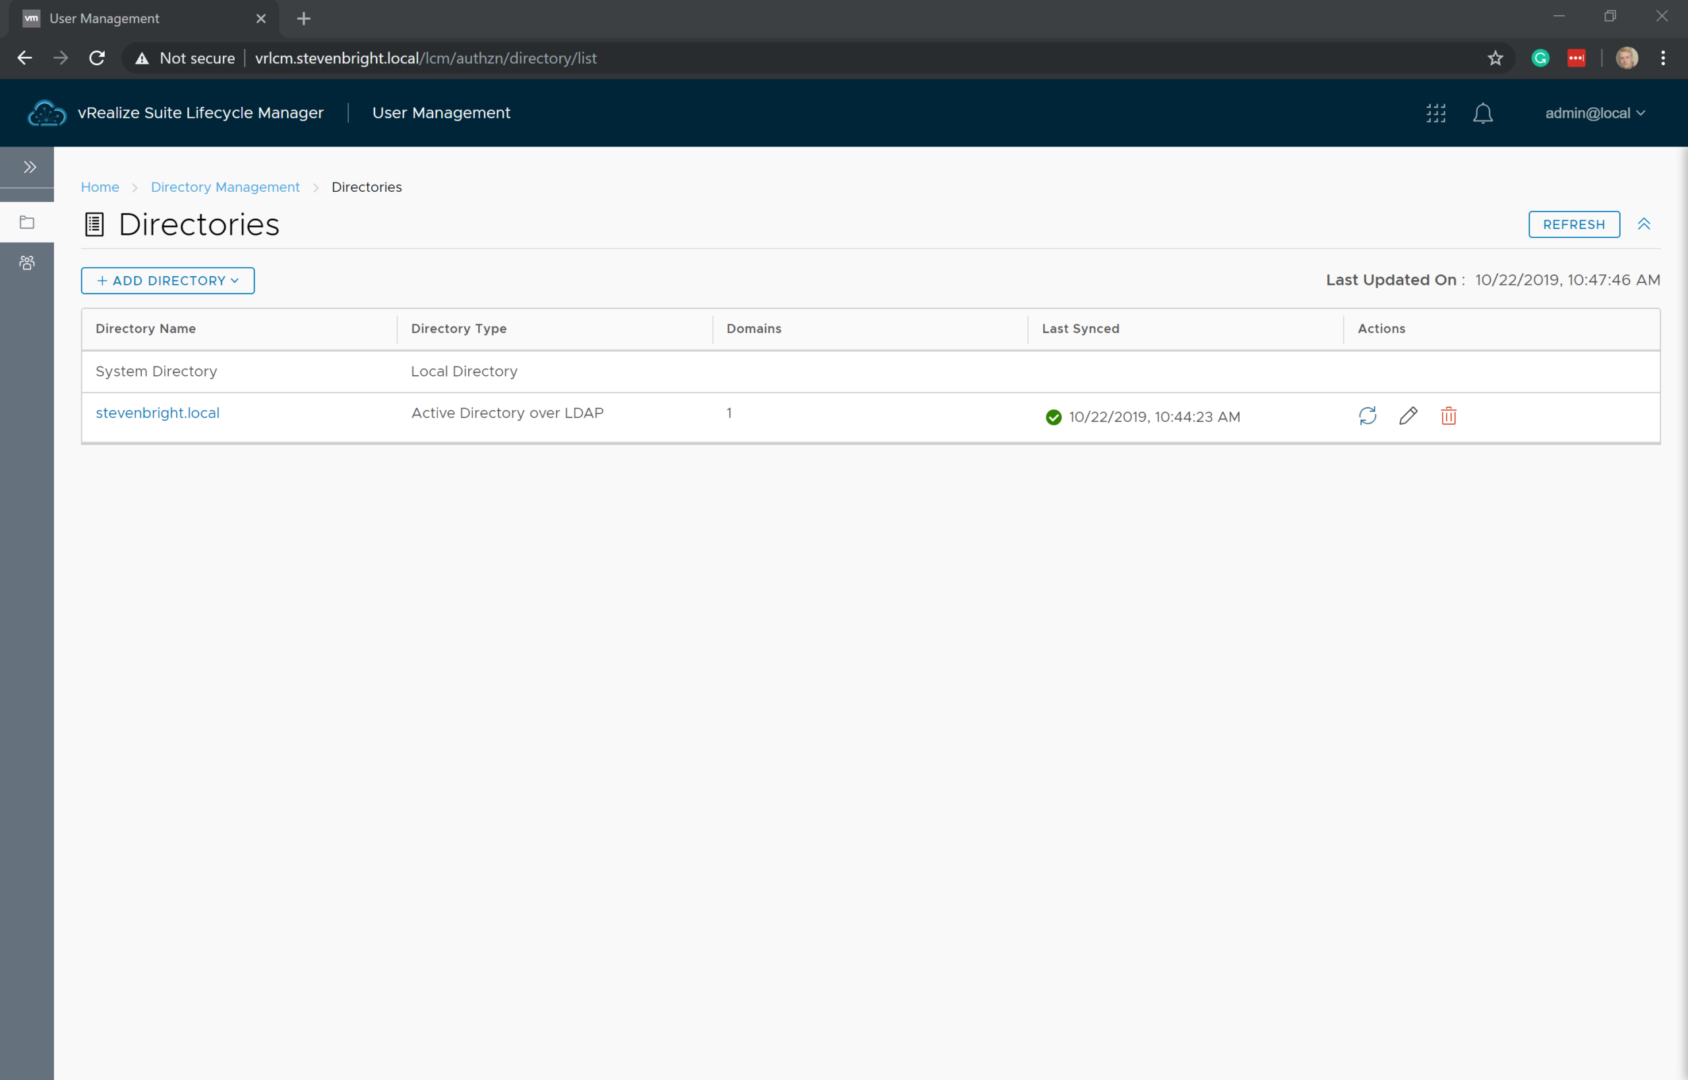 vRealize Suite Lifecycle Manager - User Management - Directory Management - Directory List - Directory Successfully Added